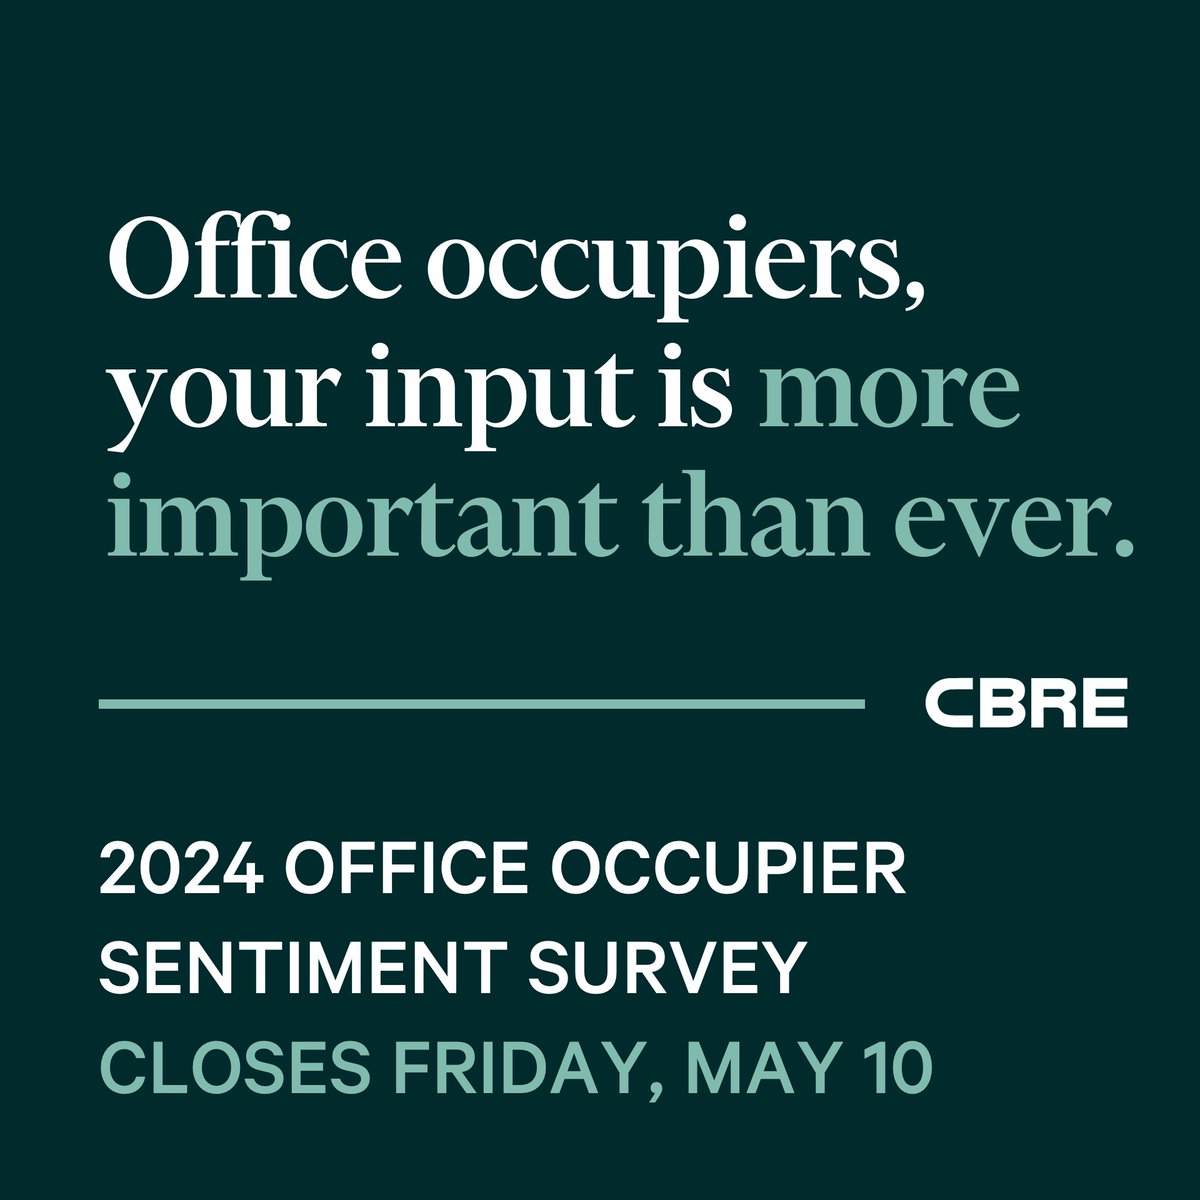 Are you a corporate real estate decision-maker? If so, we need your perspective on office attendance, portfolio optimization and technology and sustainability goals. Take the survey by this Friday—click here to get started: cbre.co/4a7uyHj